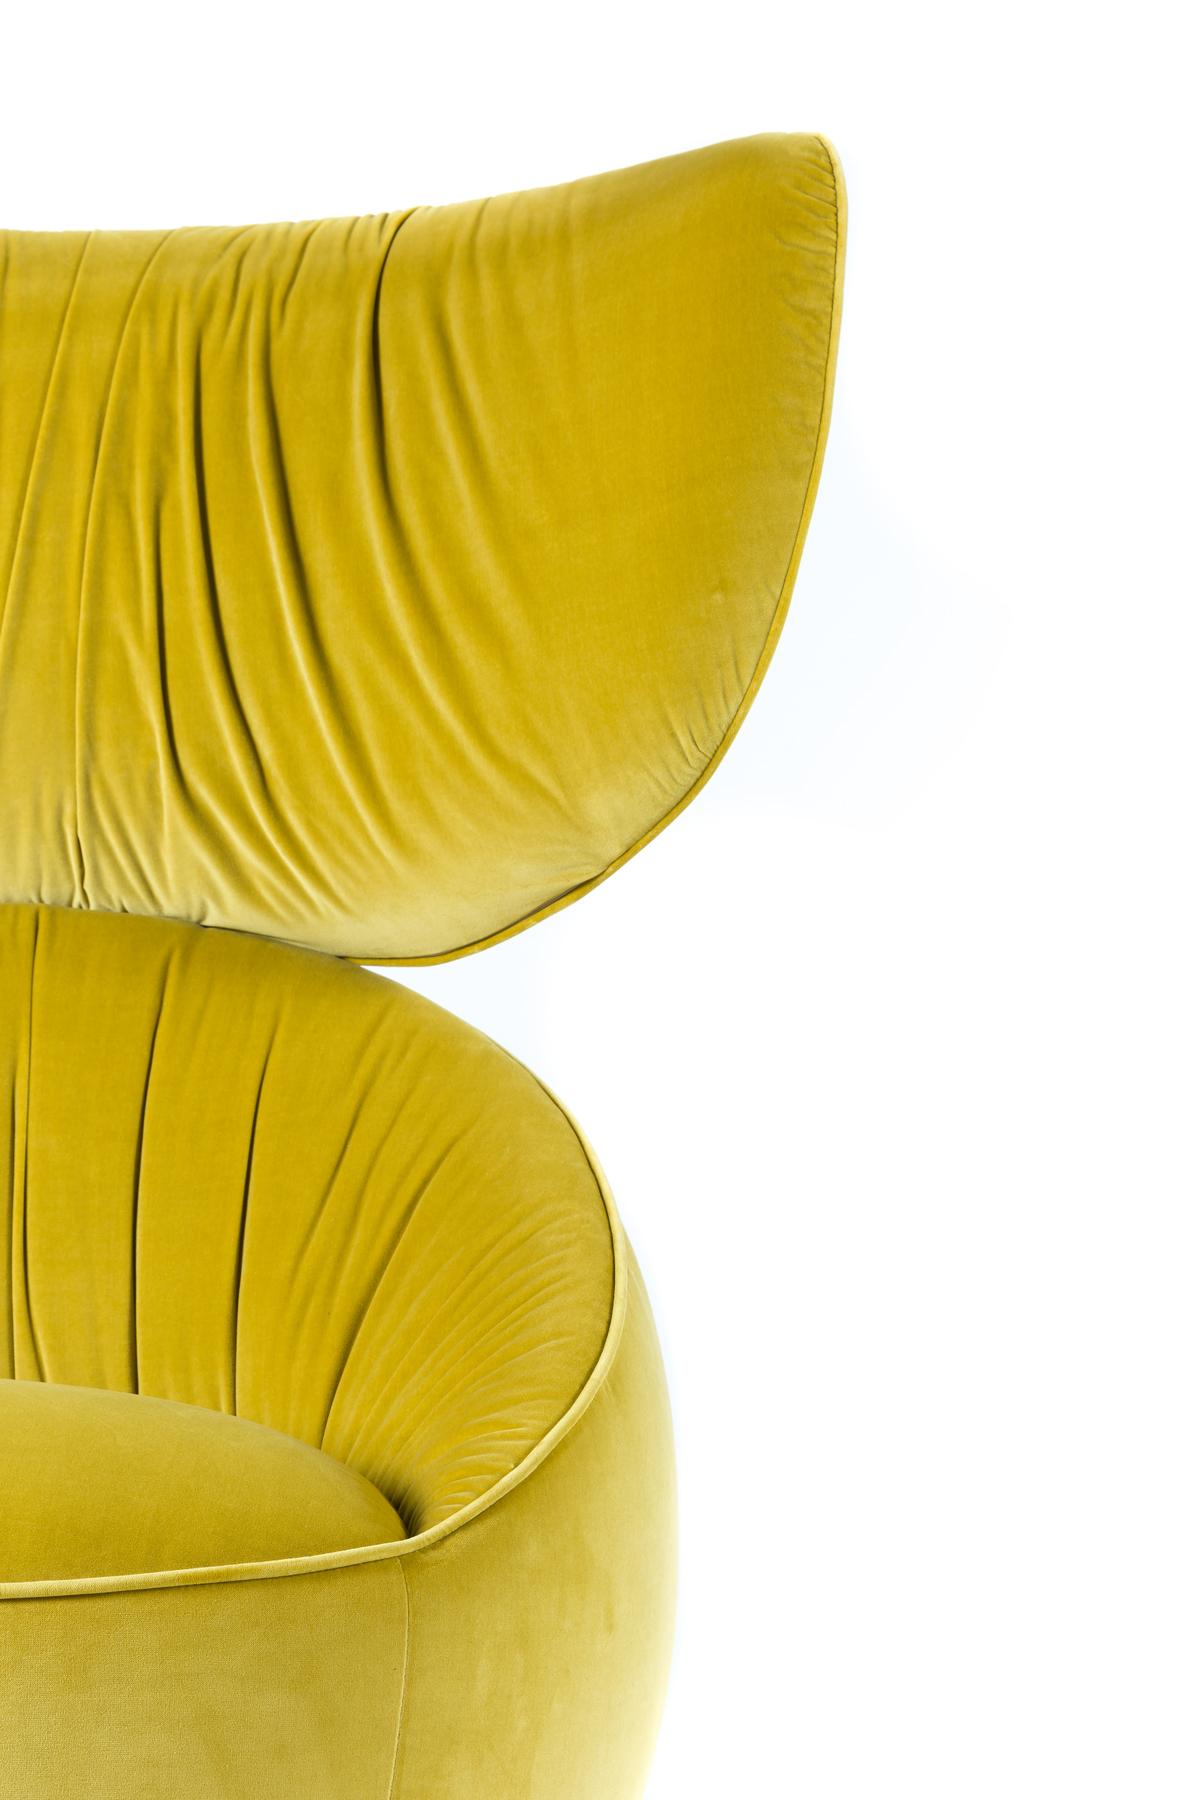 Moooi Hana Wingback Chair in Harald 3, 443 Yellow Upholstery For Sale 1